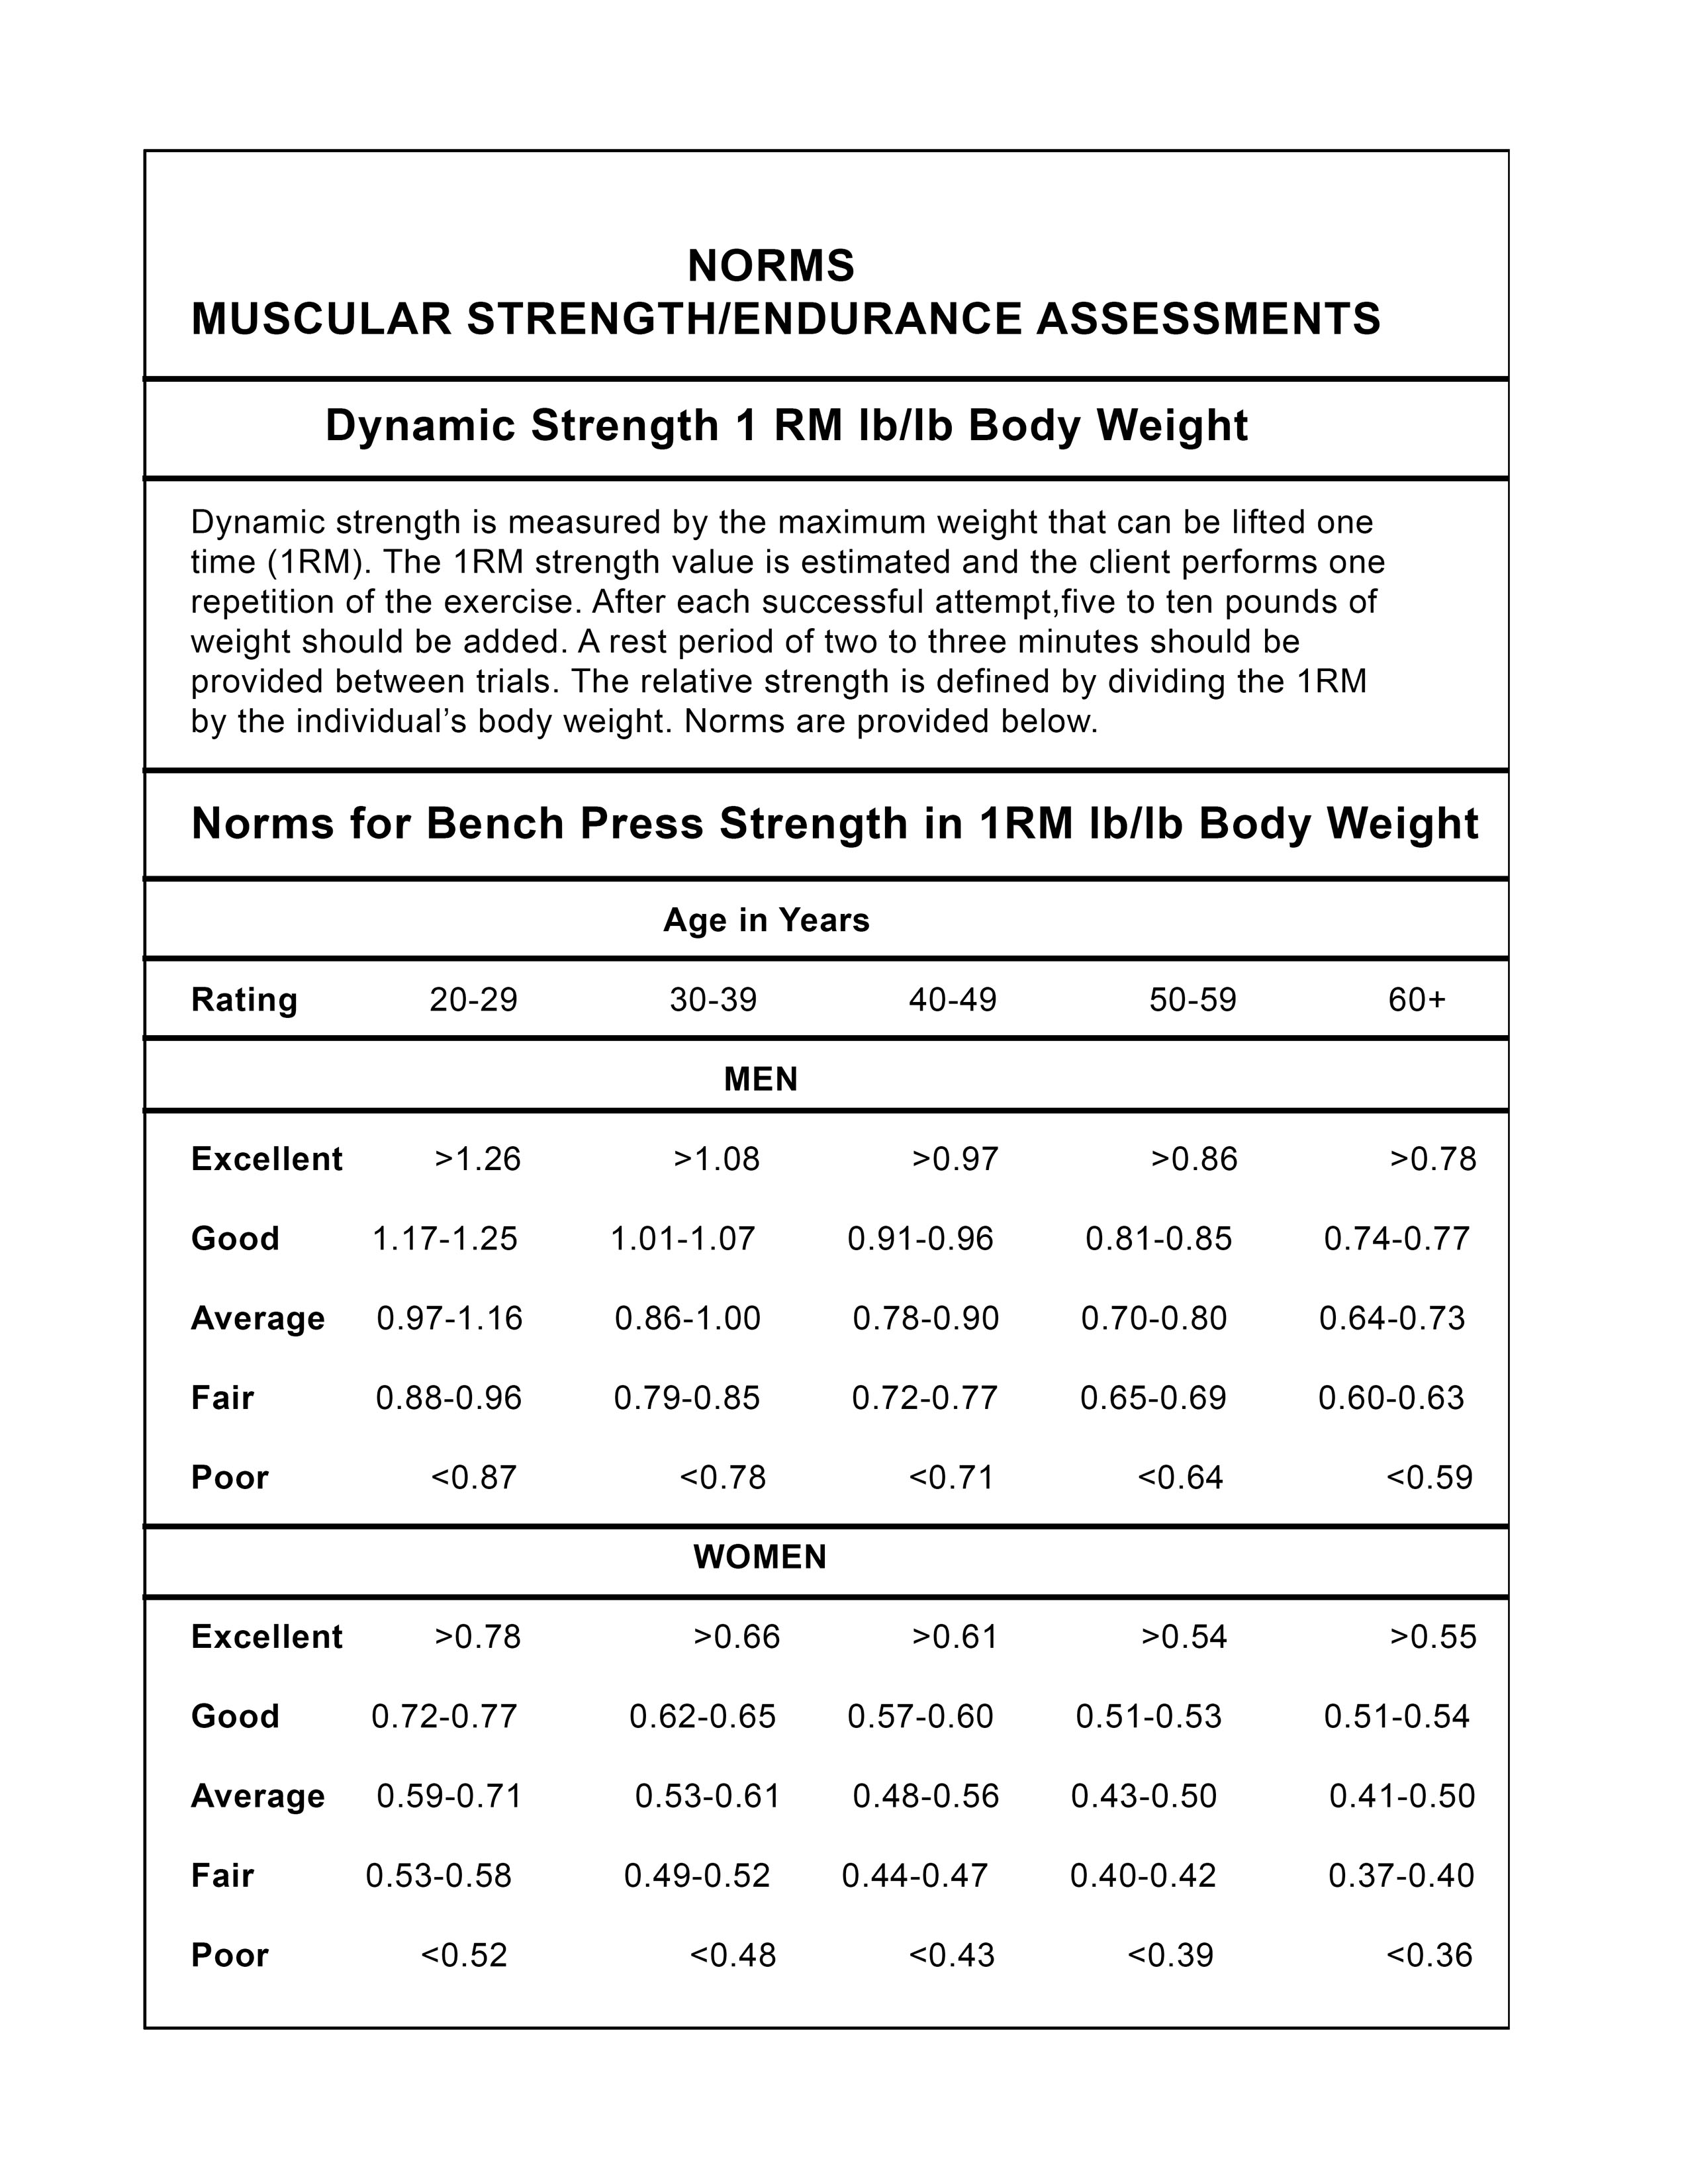 Printable bench press test norms chart for men and women.